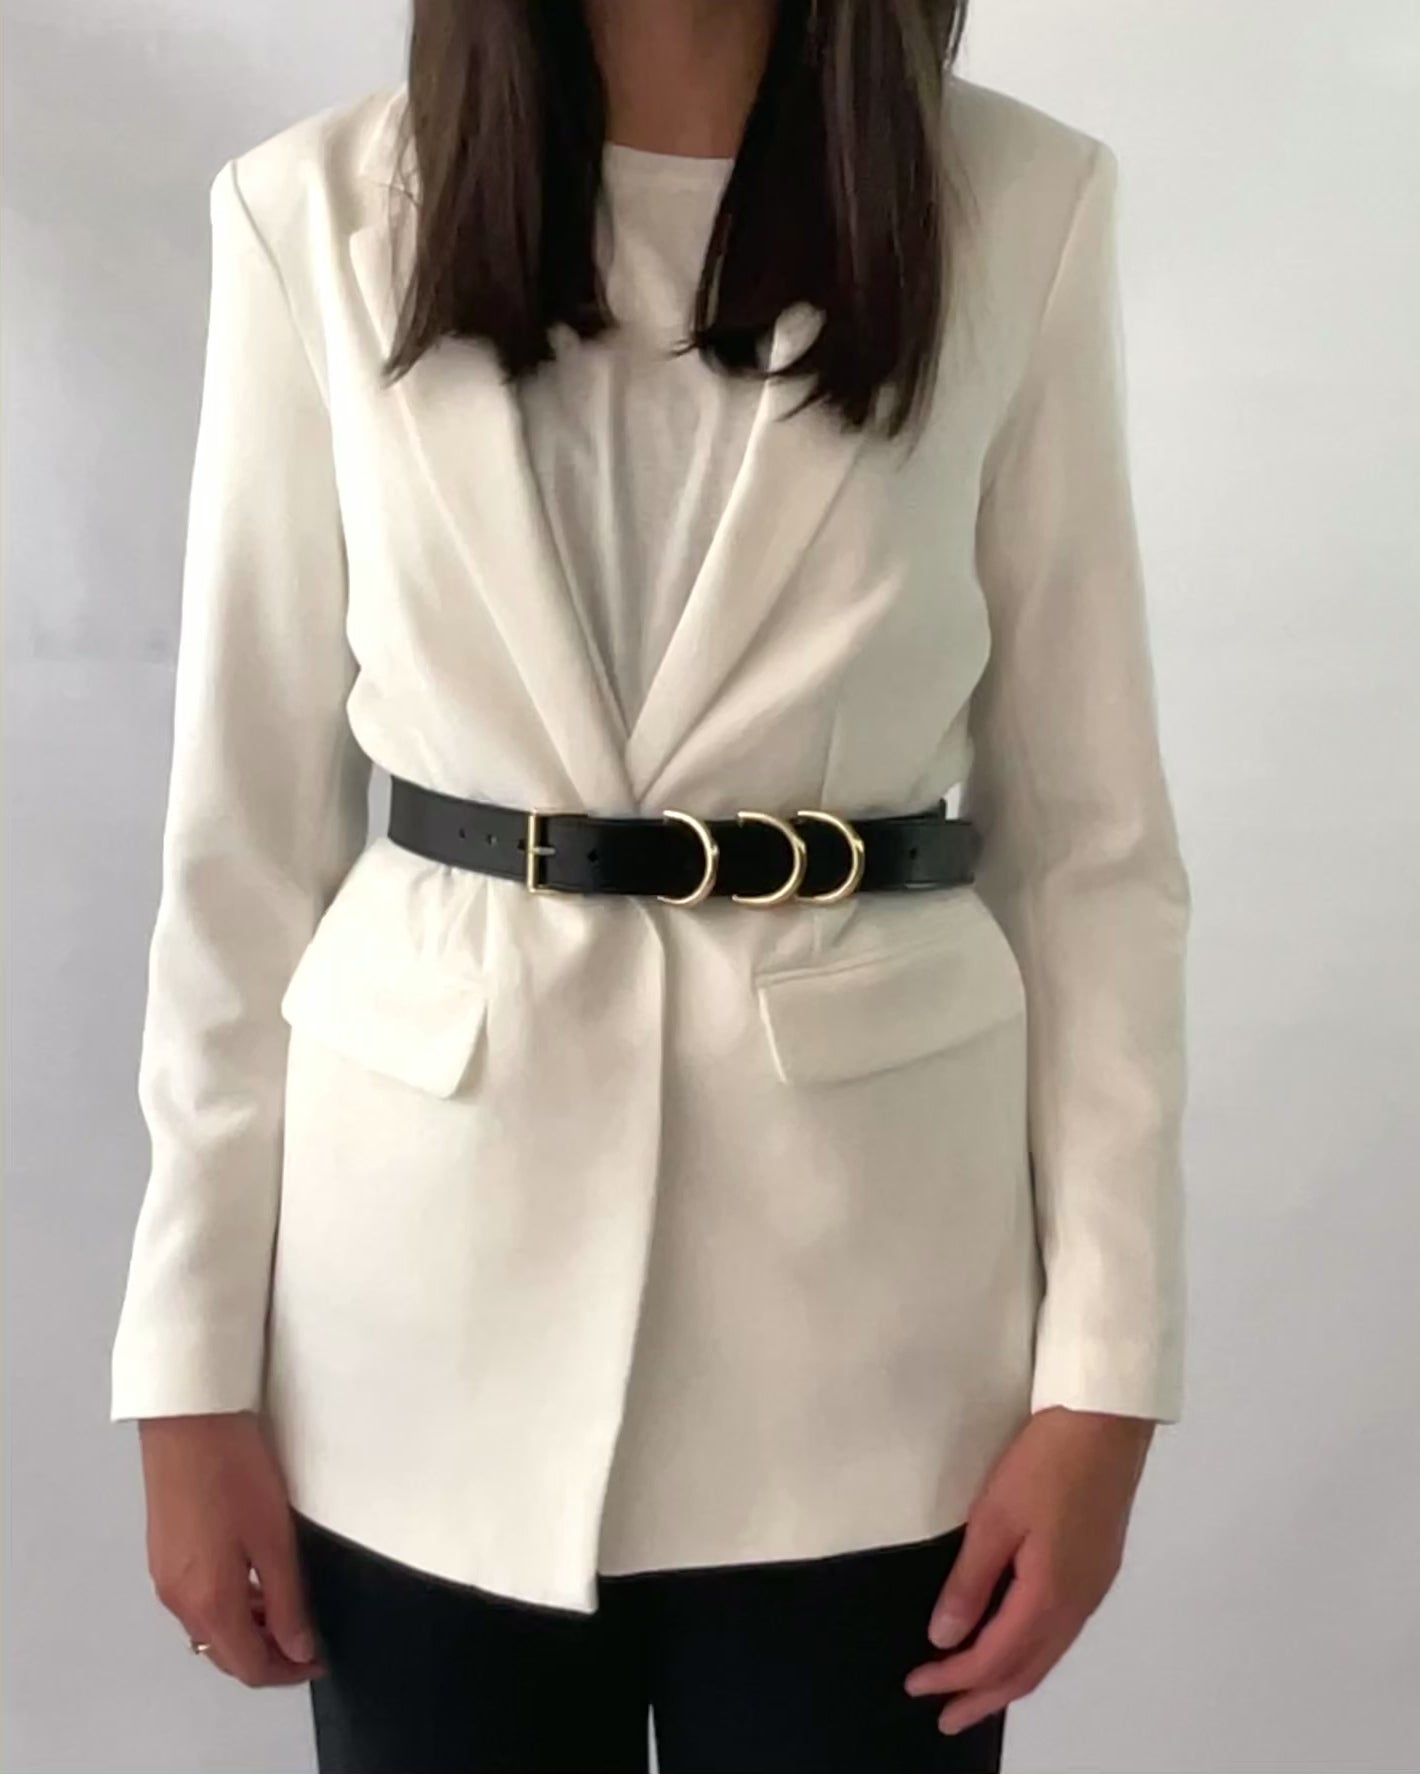 Gold hardware leather belt fitted on white blazer.